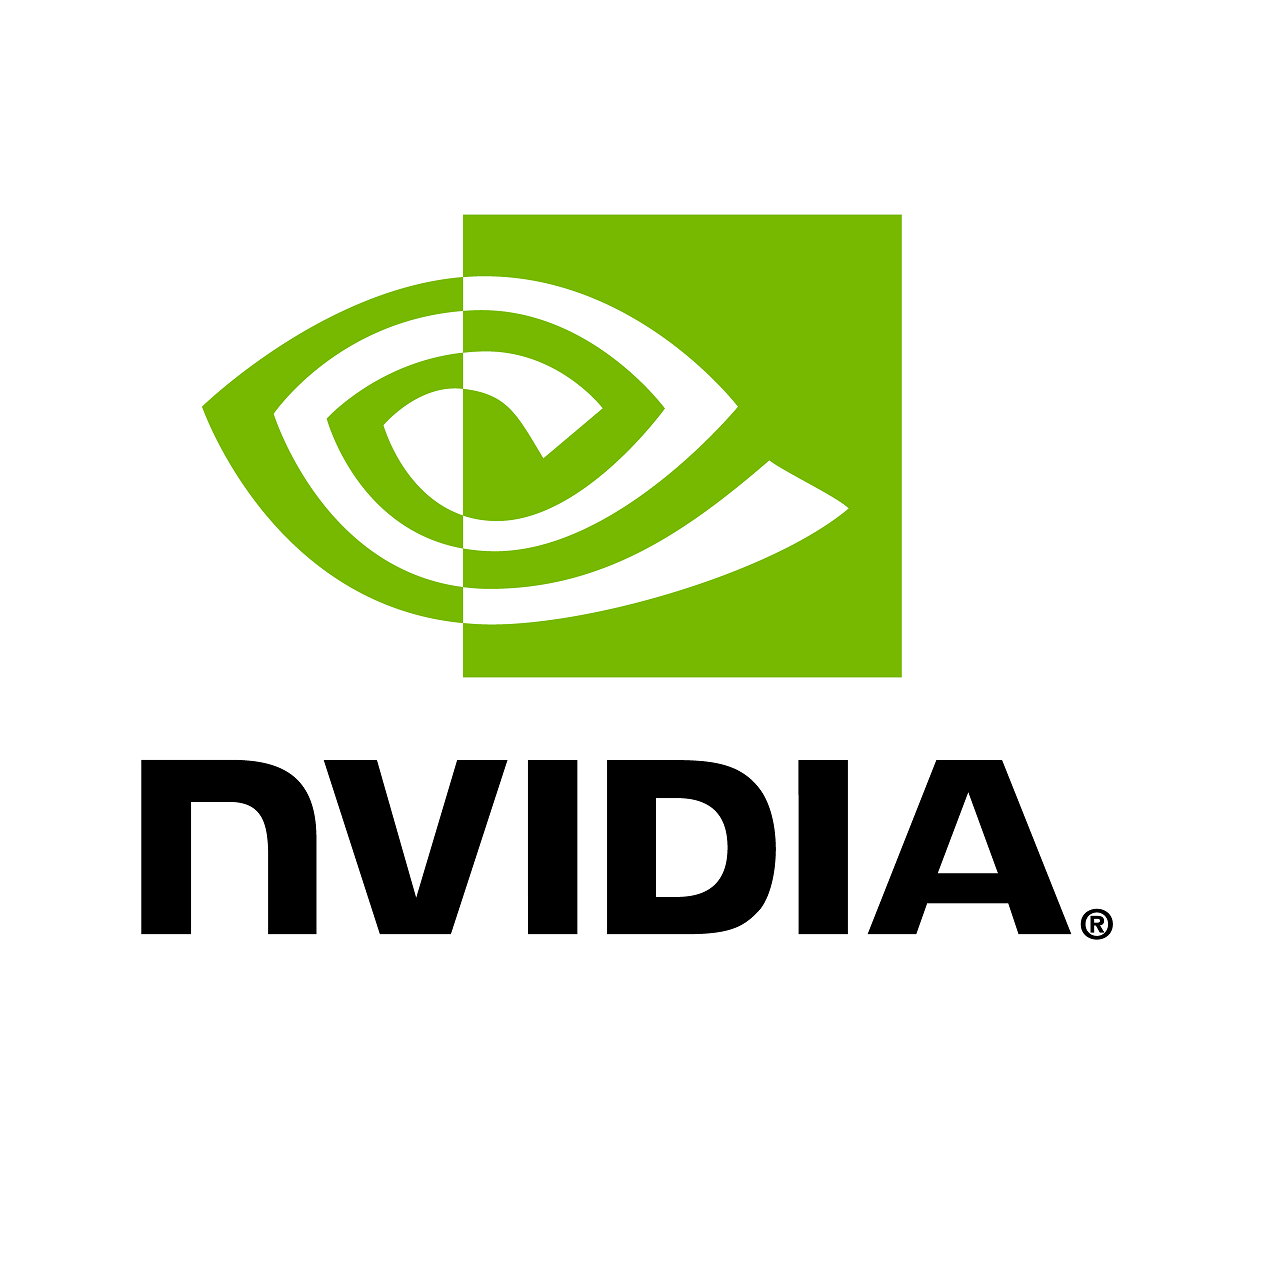 NVIDIA Support and Warranty Cumulus Linux, Silver, 5 Years, for SN2000 Series Switch